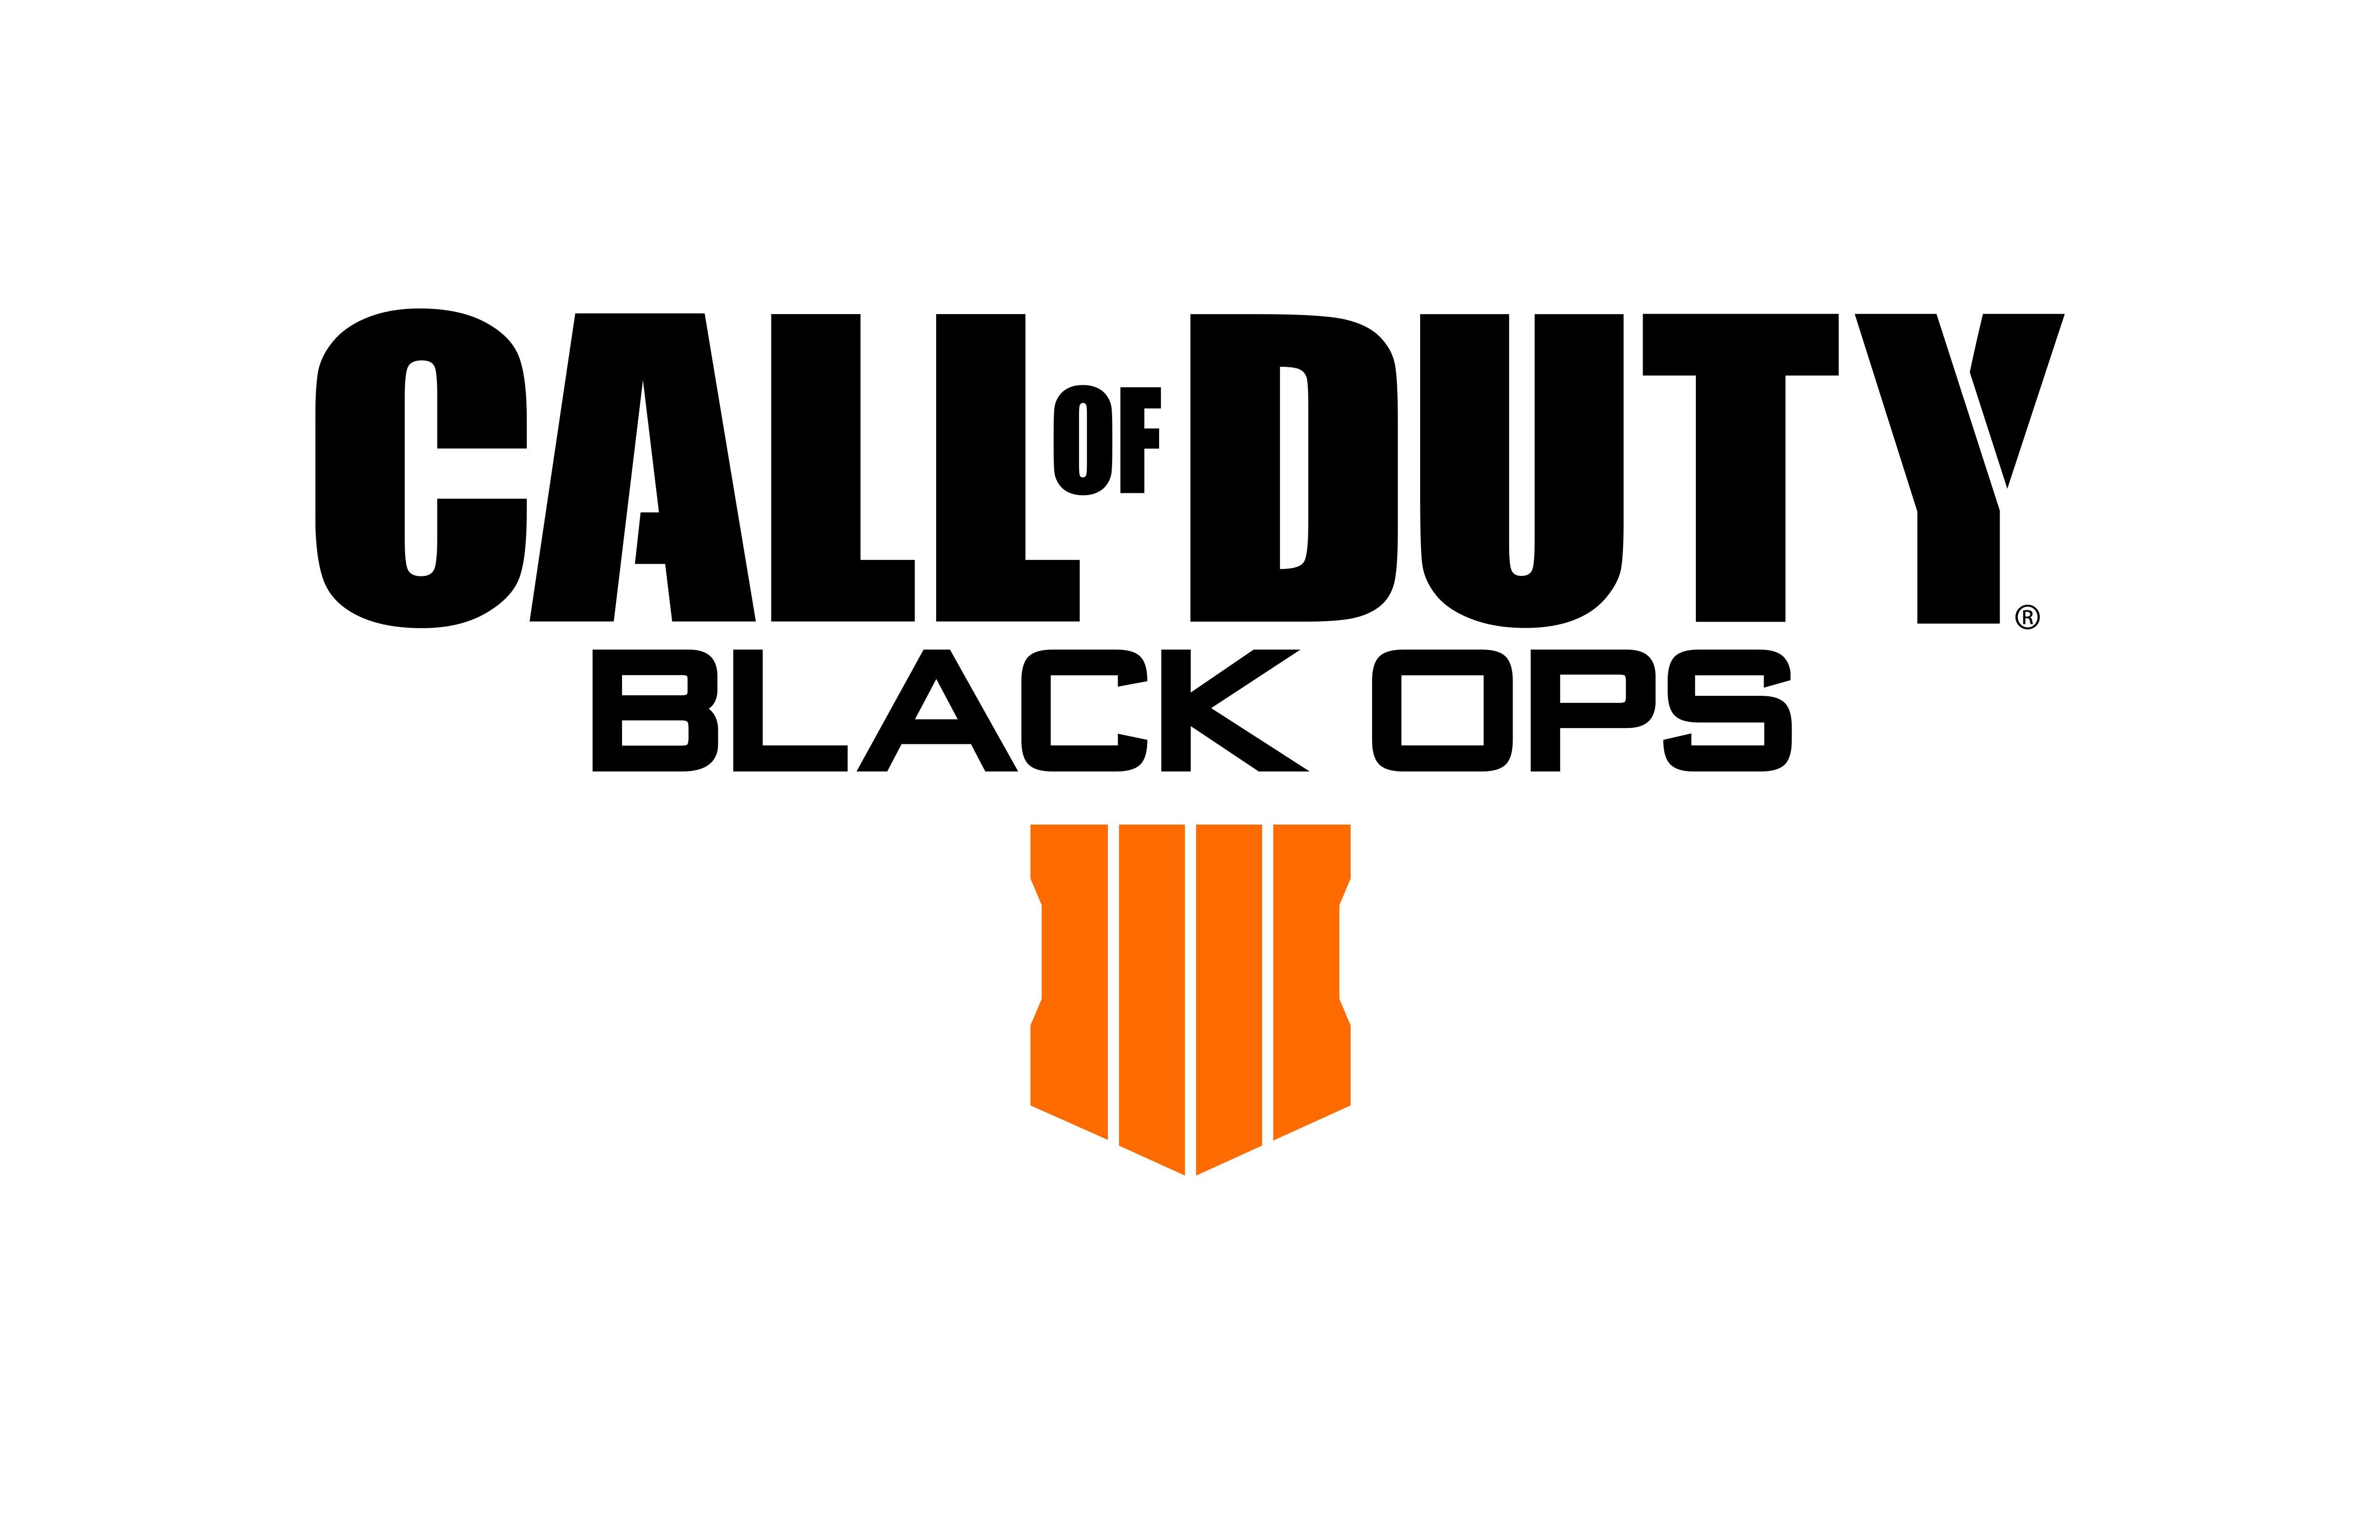 Bo4 Logo - Call of Duty: Black Ops 4 Community Reveal Event